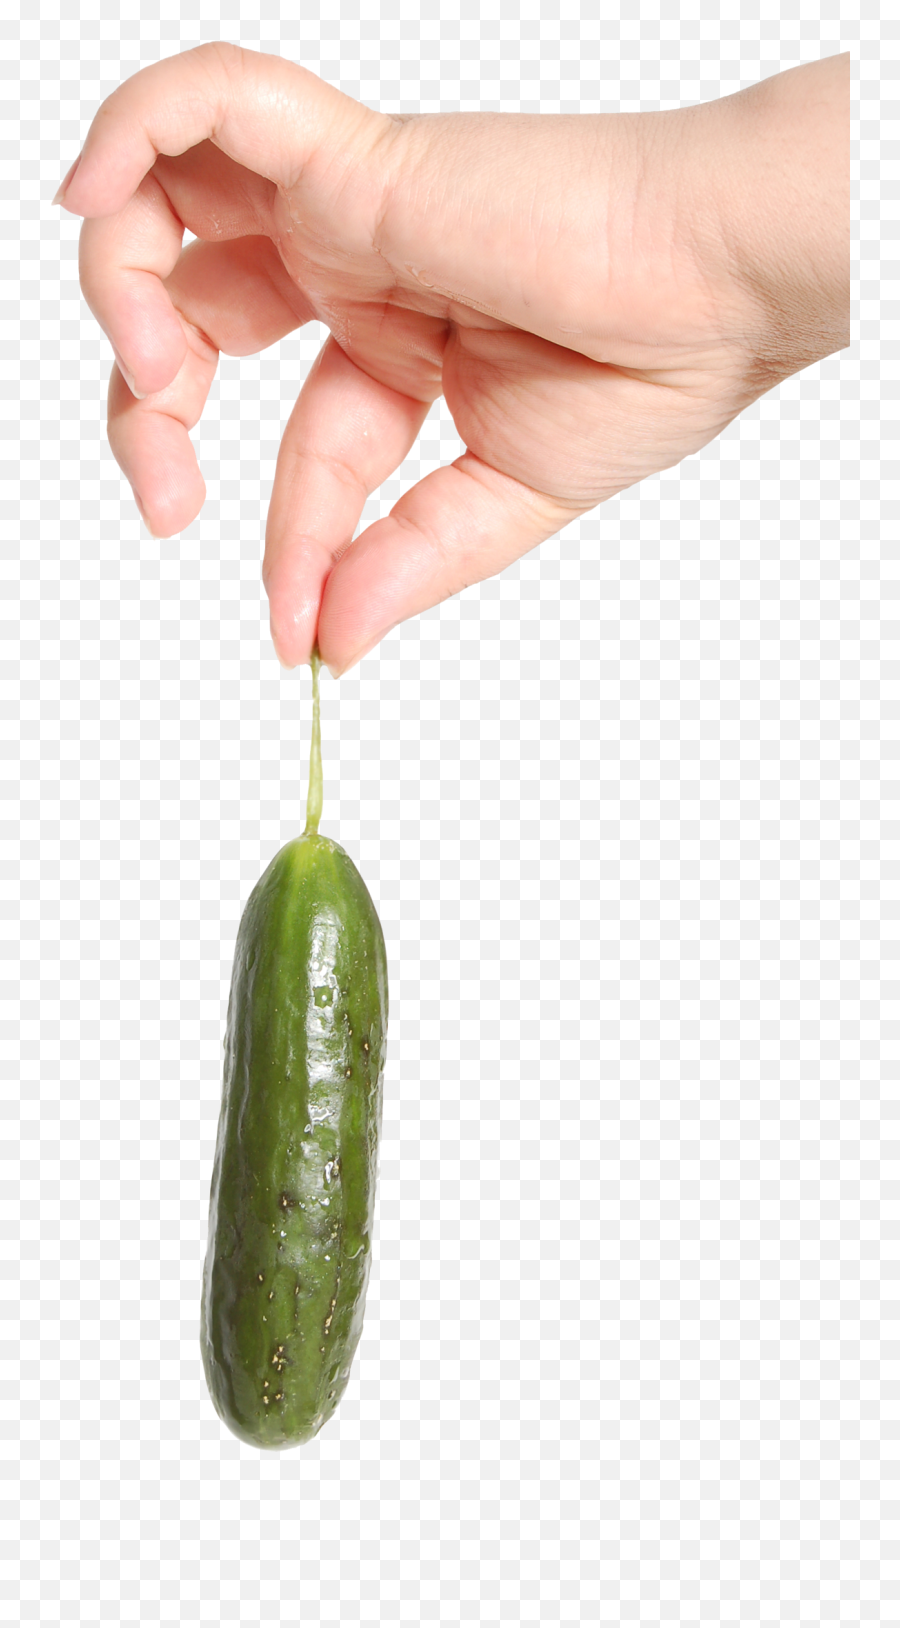 Hand Holding Cucumber Png Image - Cucumber In Hand Transparent,Cucumber Png